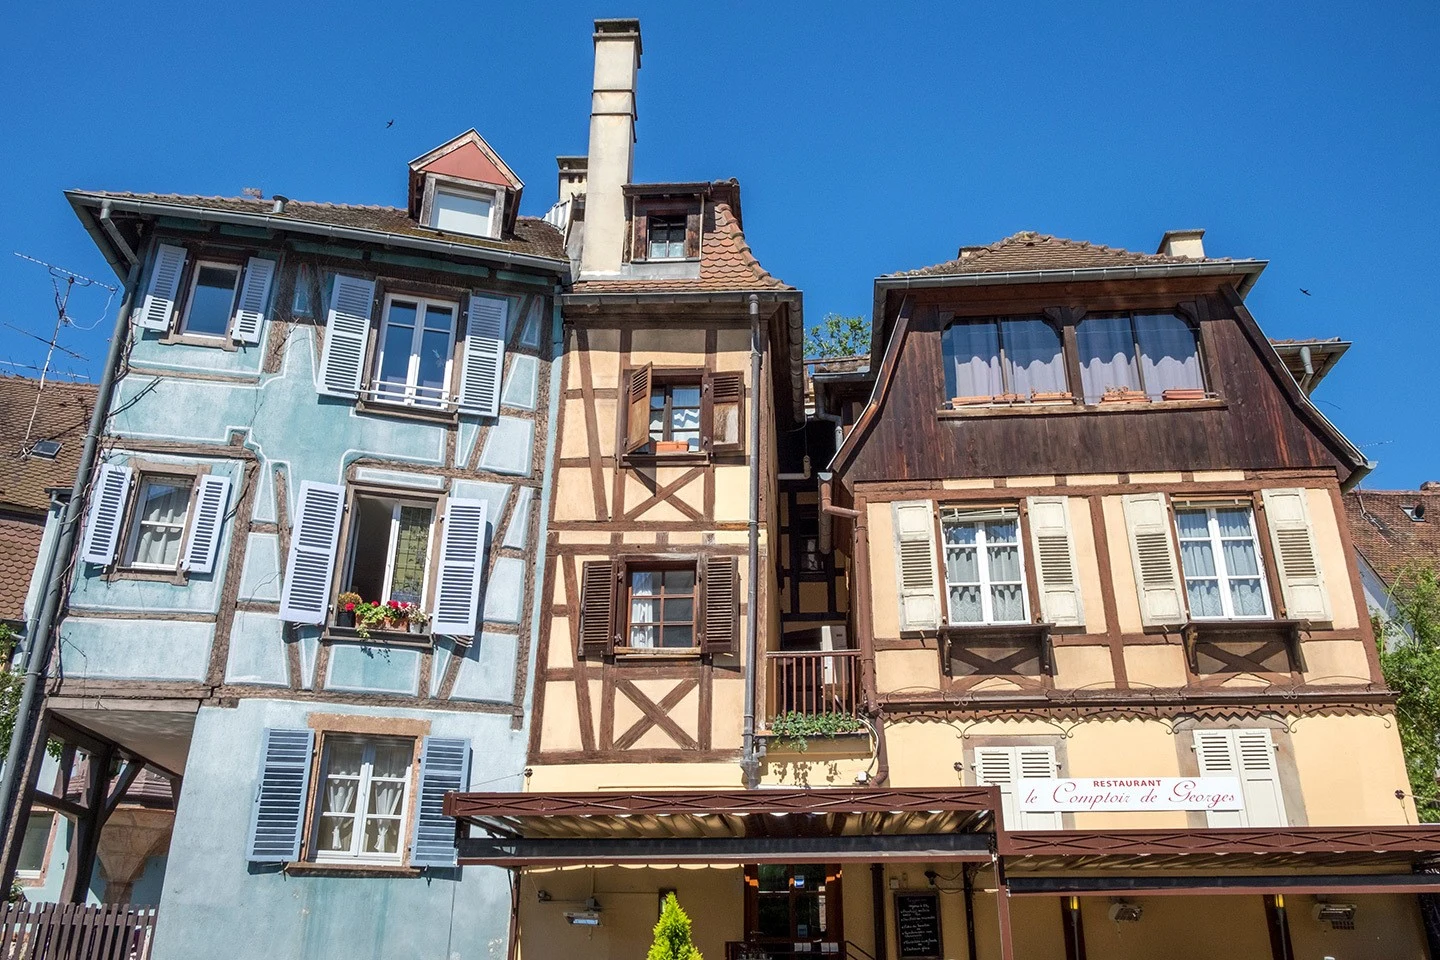 Colourful half-timbered houses in France's Alsace region